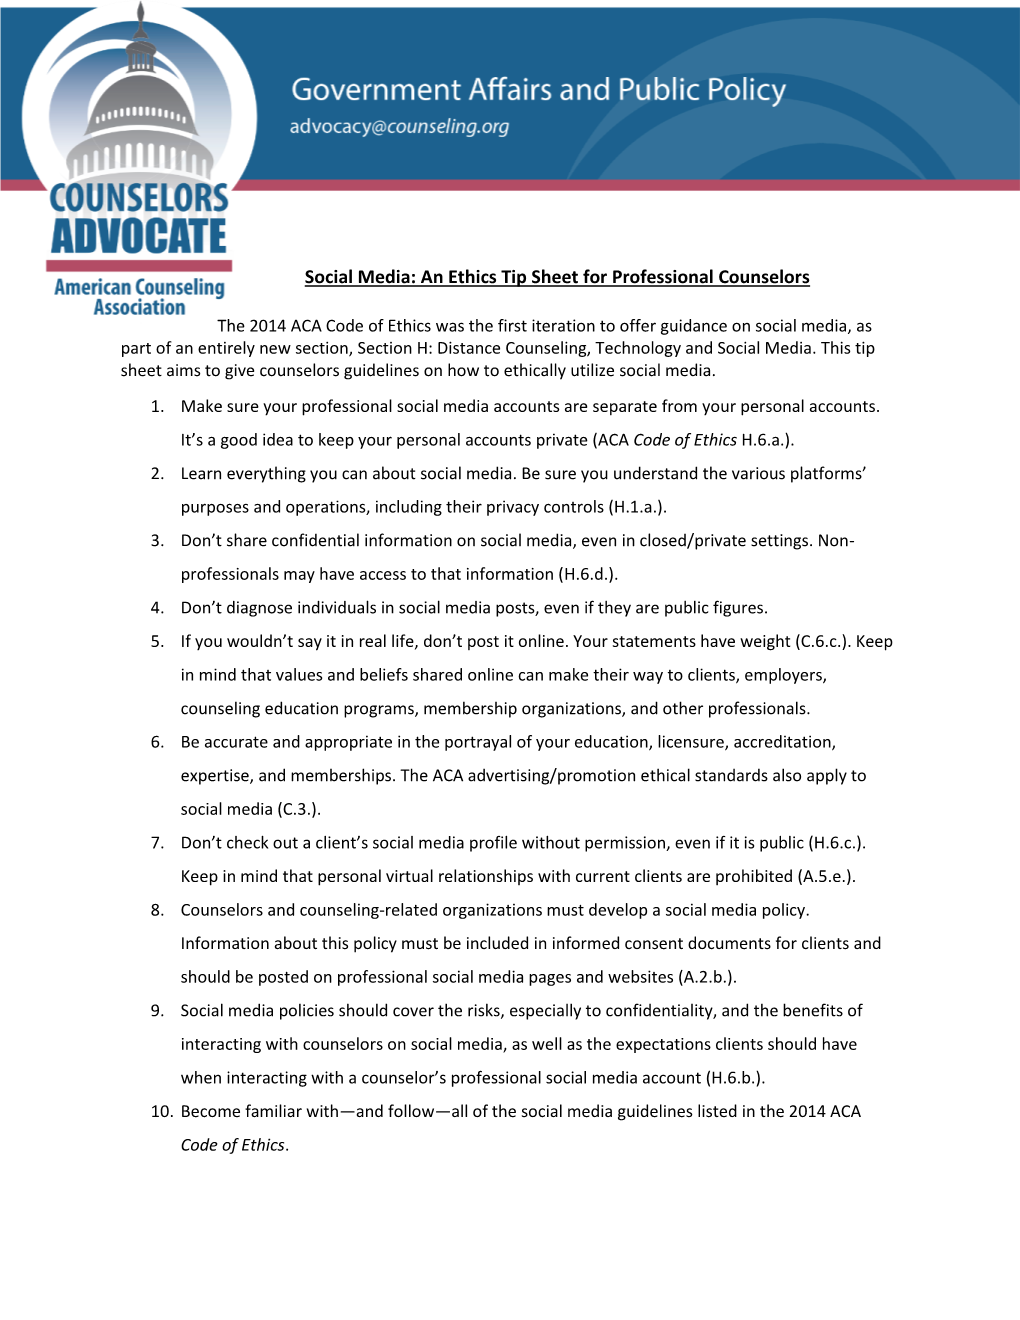 Social Media: an Ethics Tip Sheet for Professional Counselors